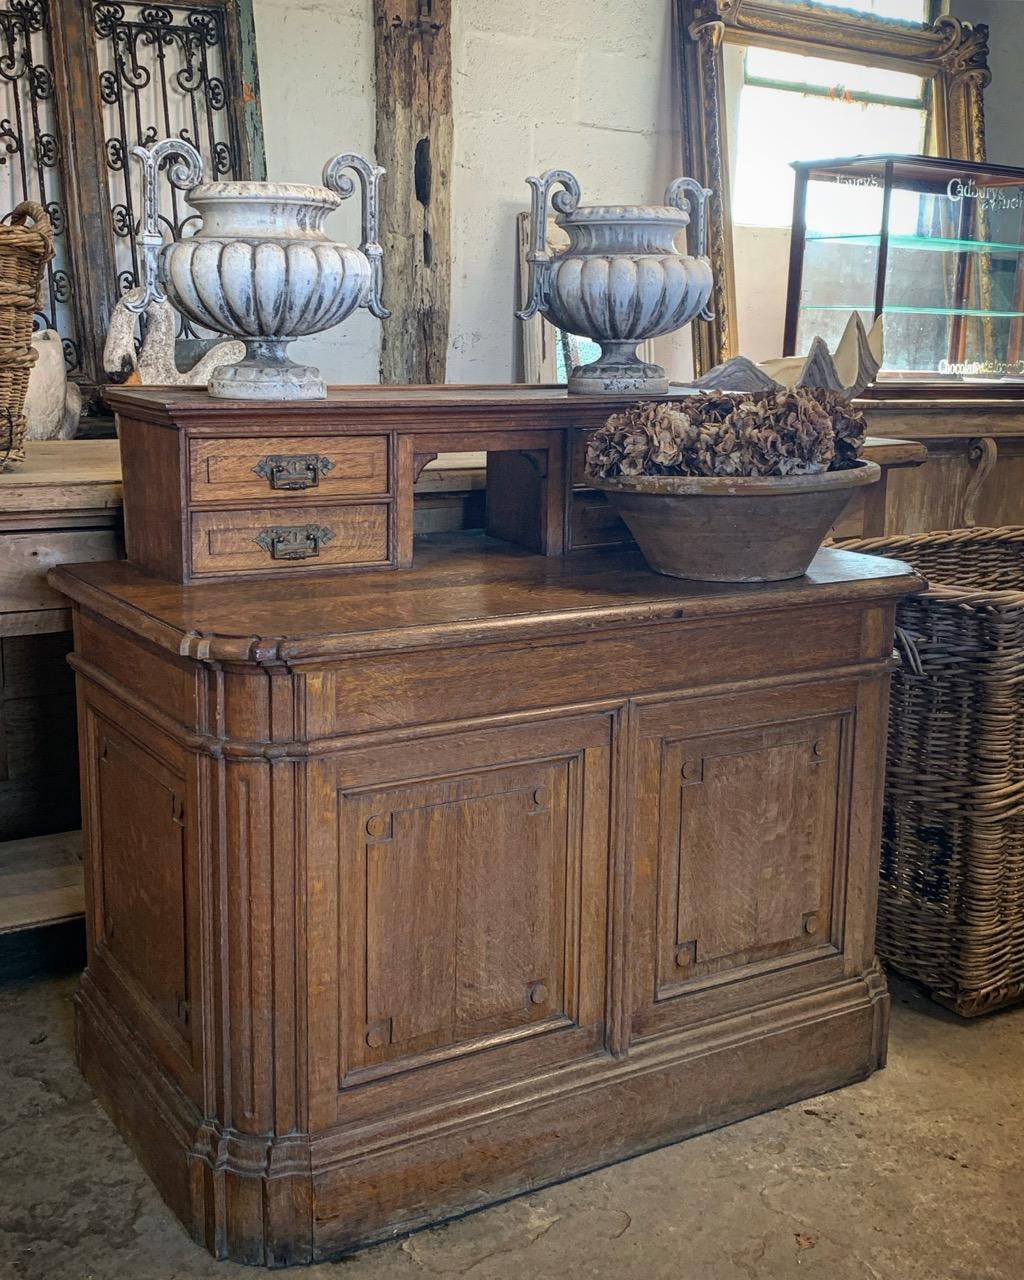 A lovely early 20th century French shop counter with drawers. This would be ideal for displaying items in a shop or indoors.